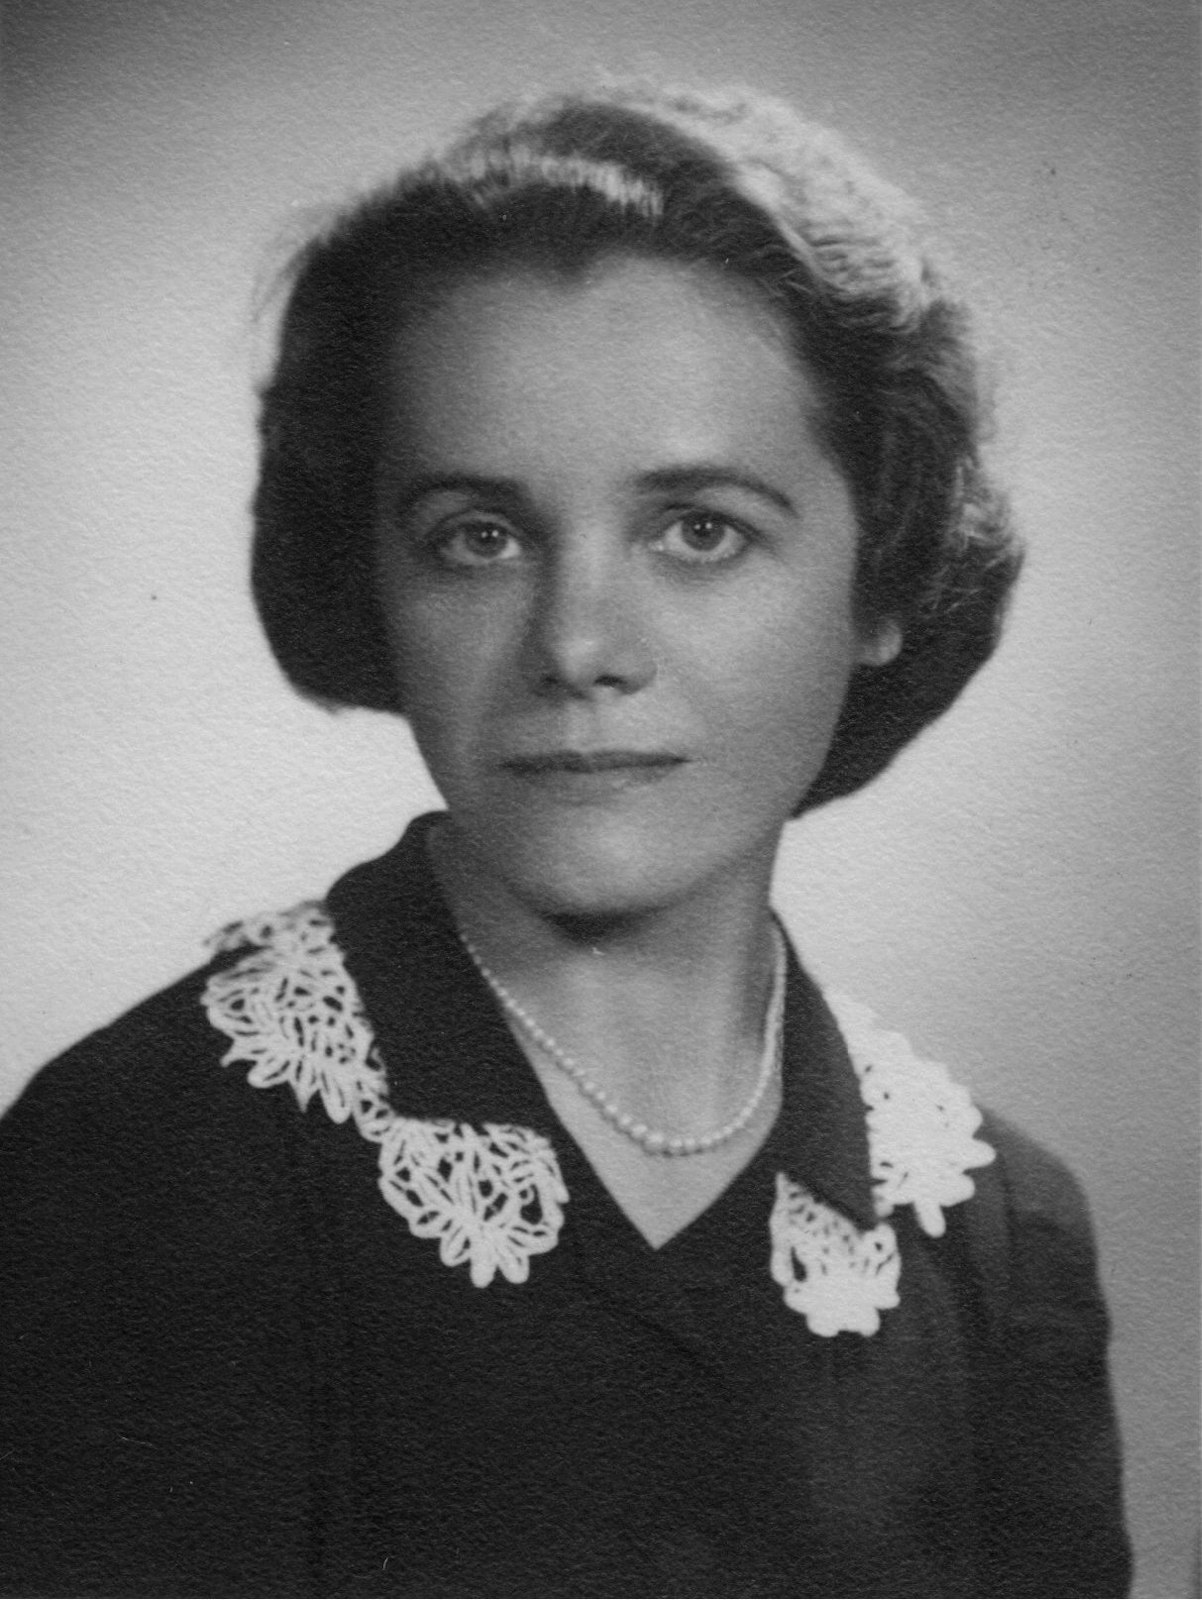 Blessed Natalia Tulasiewicz is pictured in an undated portrait. Tulasiewicz was a Polish wartime teacher who never ceased to bring up young people in knowledge and faith, despite the threat of arrest by Nazis. Caught by Germans, she was sent to Ravensbrück death camp, where she died April 30, 1945, in a last group of people sent to the gas chamber as the Allied Forces were about to liberate the camp. (OSV News photo/courtesy Tulasiewicz family)